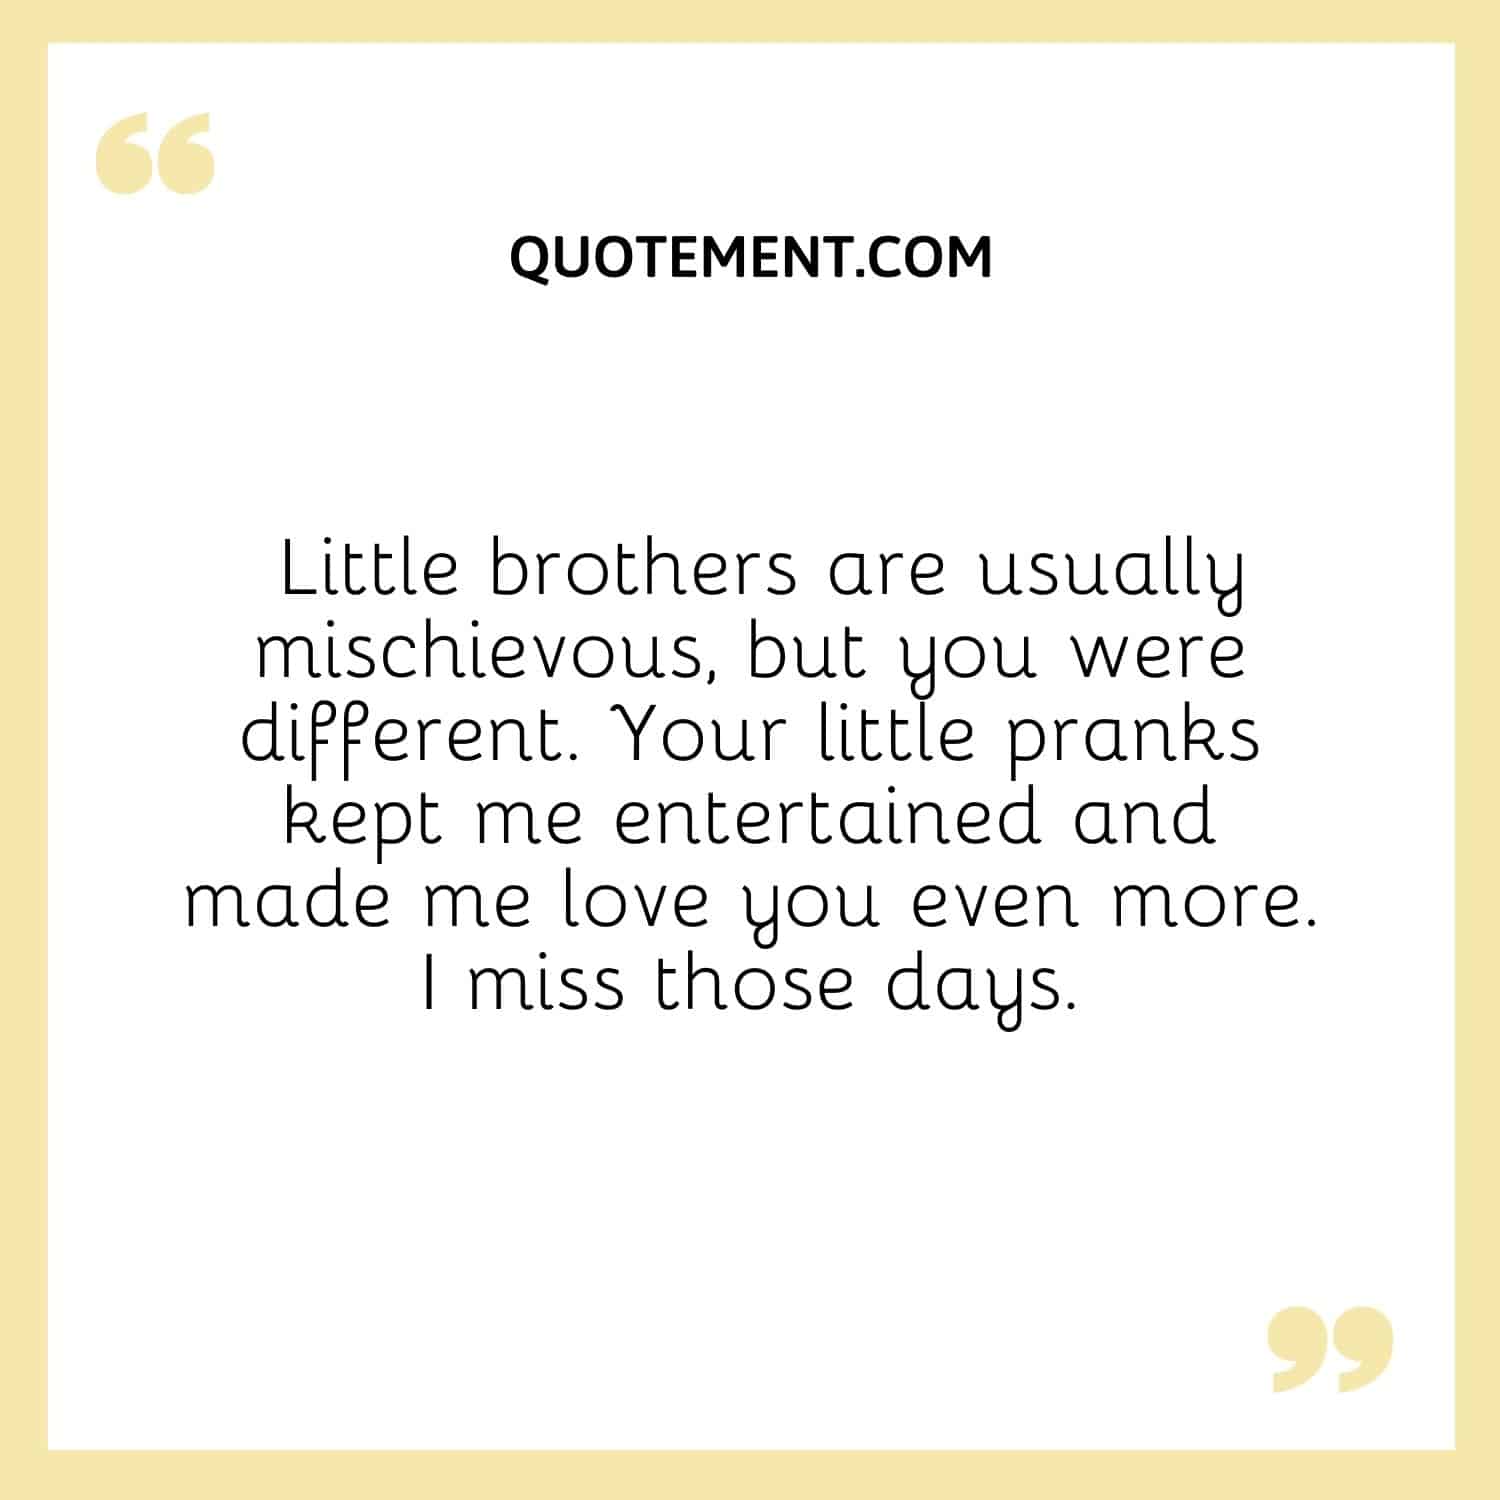 Little brothers are usually mischievous, but you were different. Your little pranks kept me entertained and made me love you even more. I miss those days.